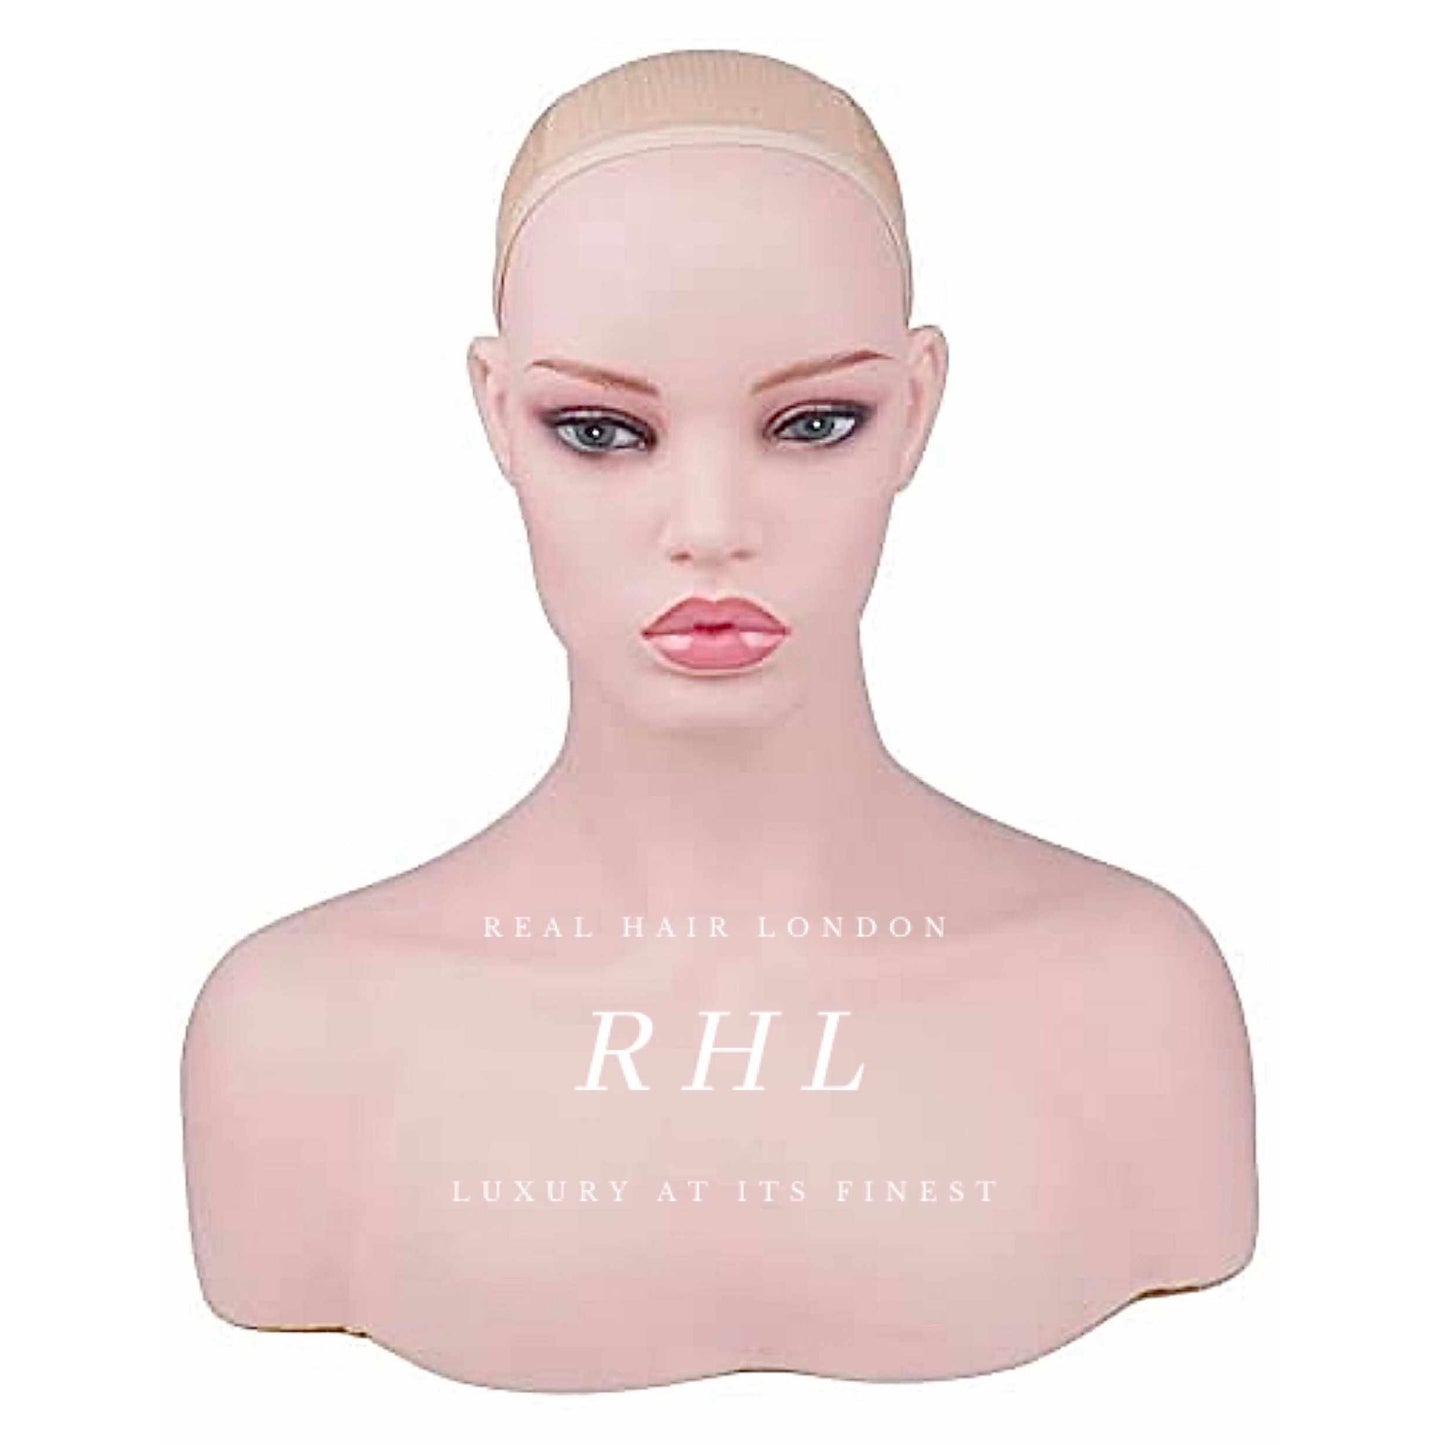 Female Mannequin Head And Bust Pale Skin Tone Realistic Makeup Wig And Jewellery Display Stand-Mannequins-Real Hair London-Real Hair London